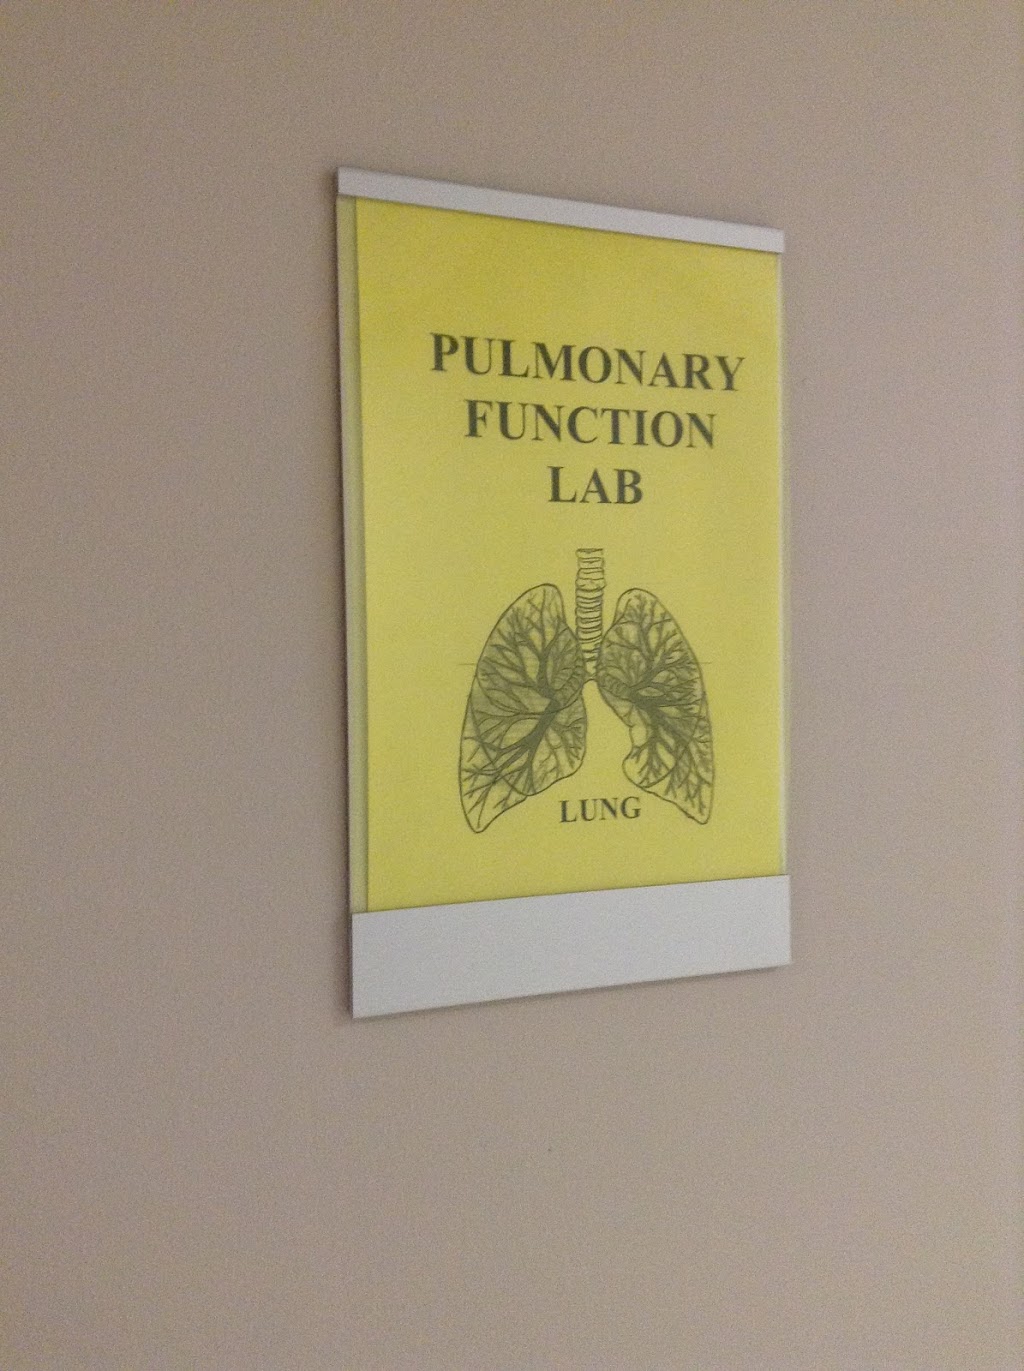 Scarborough North Pulmonary Function | 4040 Finch Ave E Suite LL5, Scarborough, ON M1S 4V5, Canada | Phone: (416) 335-6735